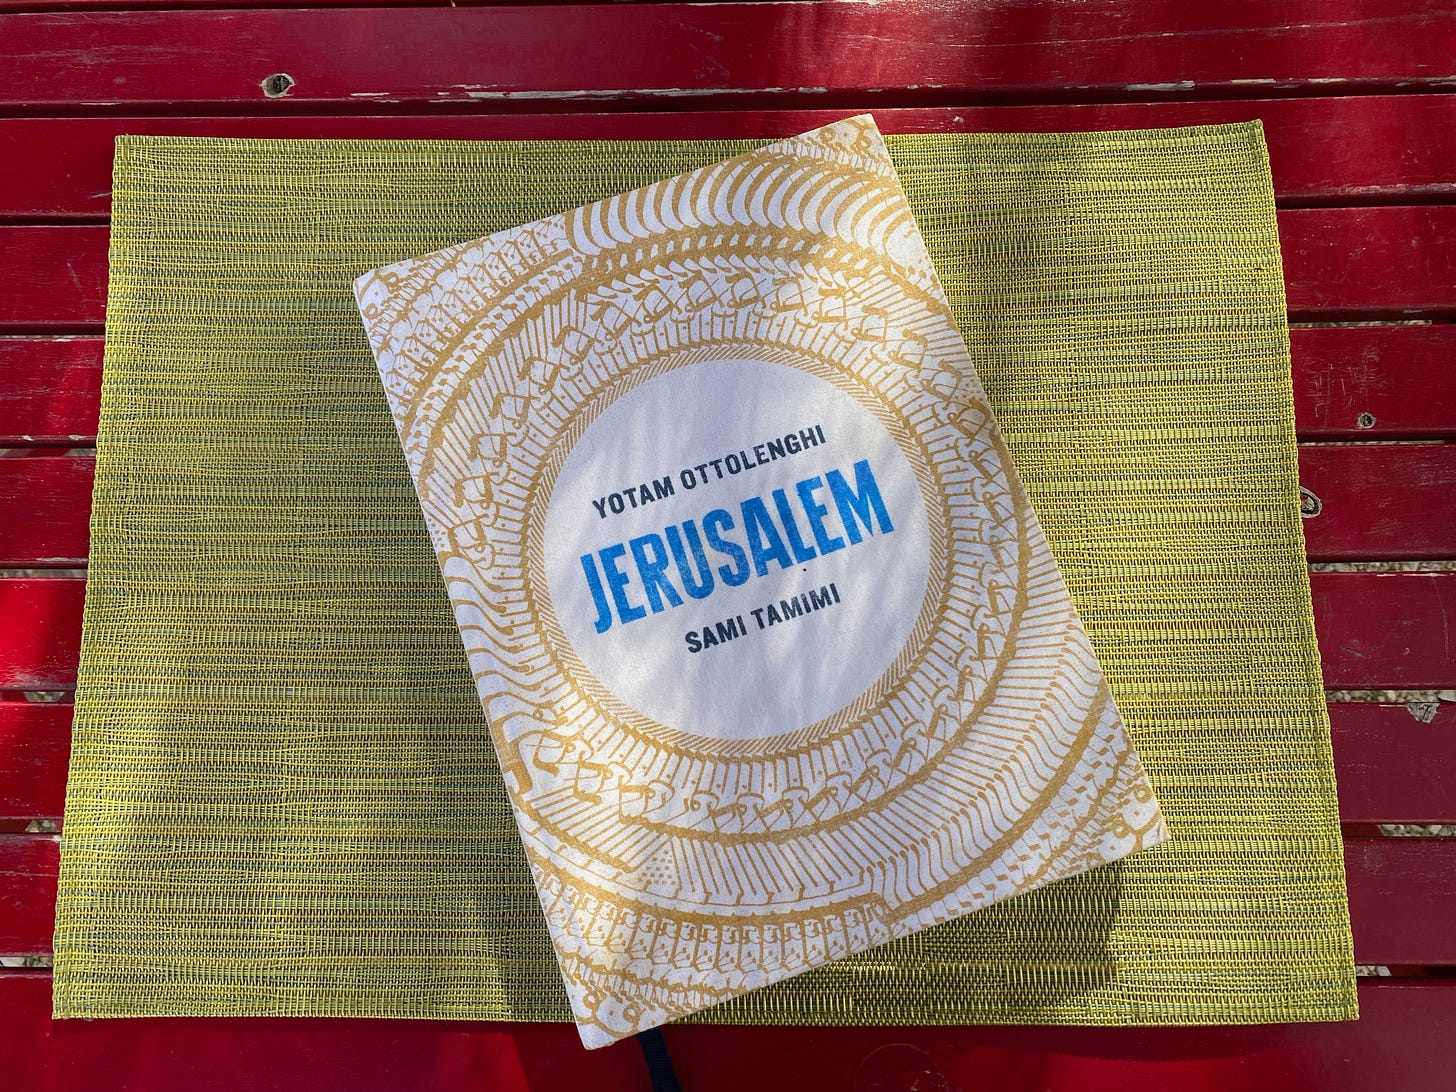 Picture of the cook book - Jerusalem by Yotam Ottolenghi and Sami Tamimi on an outside table.